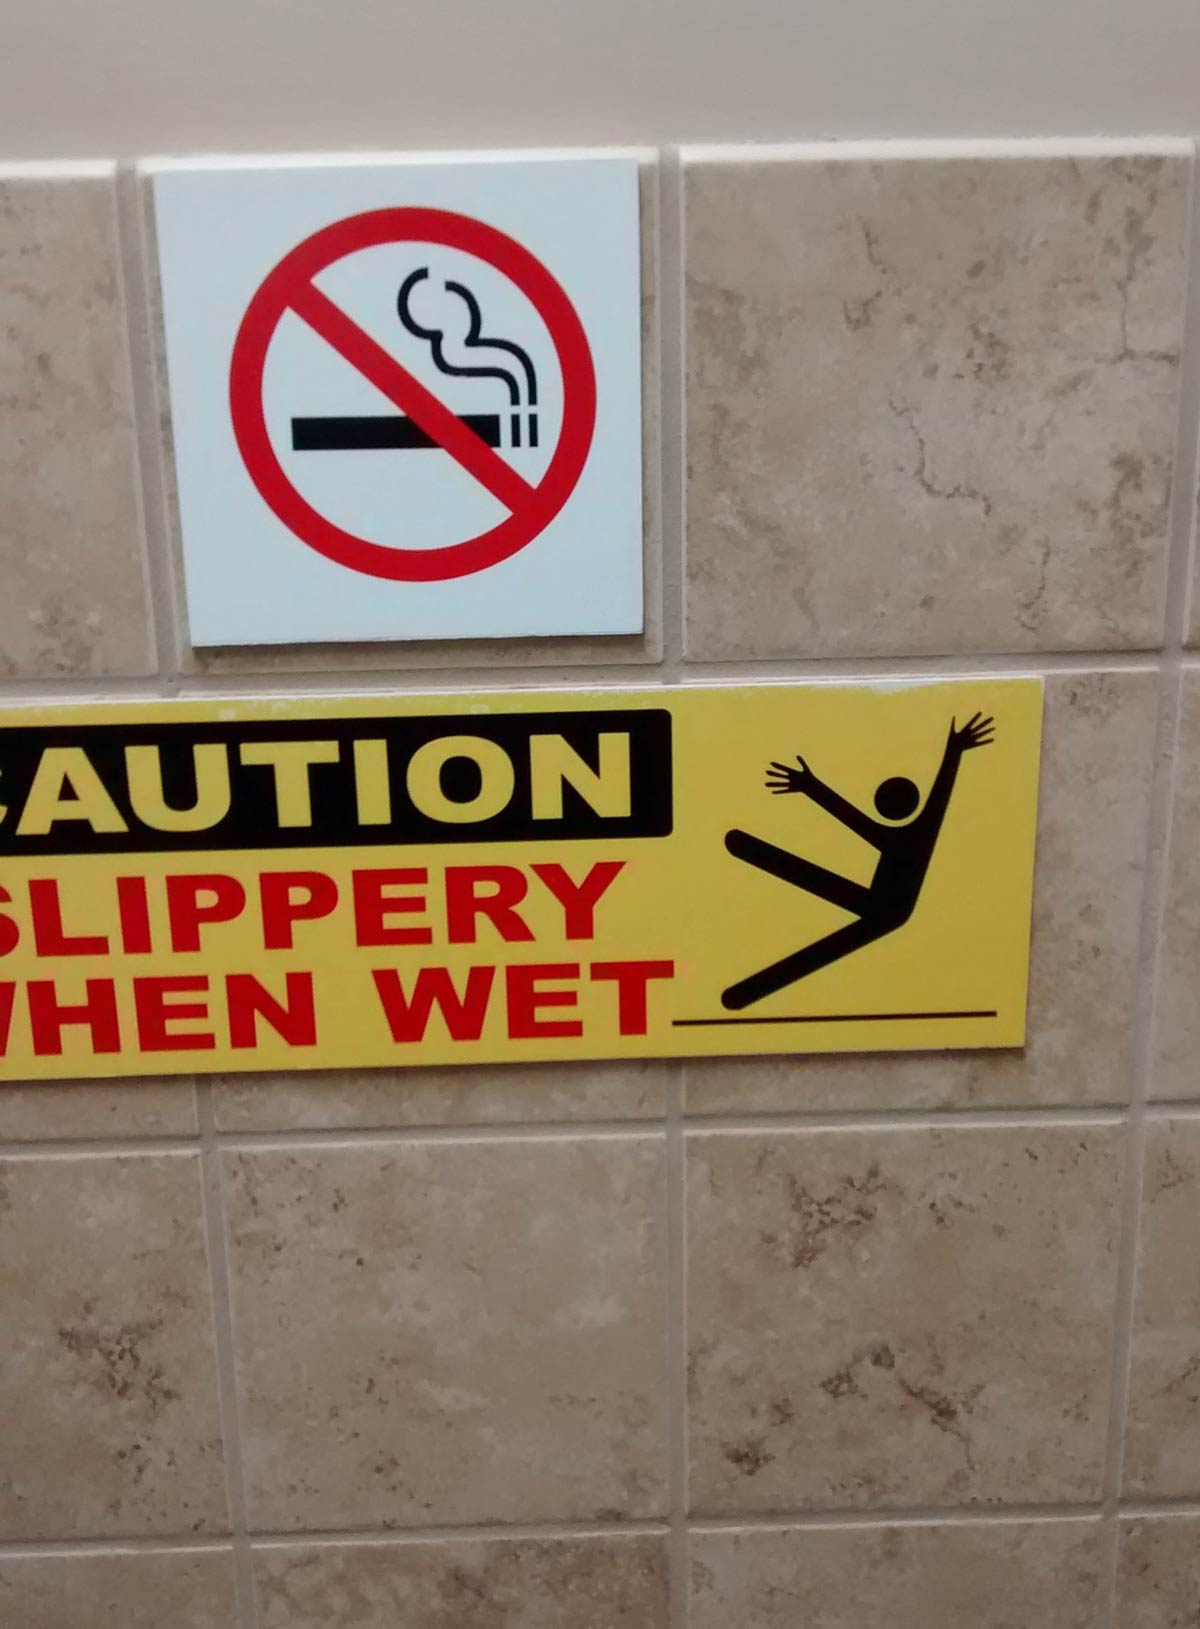 This caution man has jazz hands